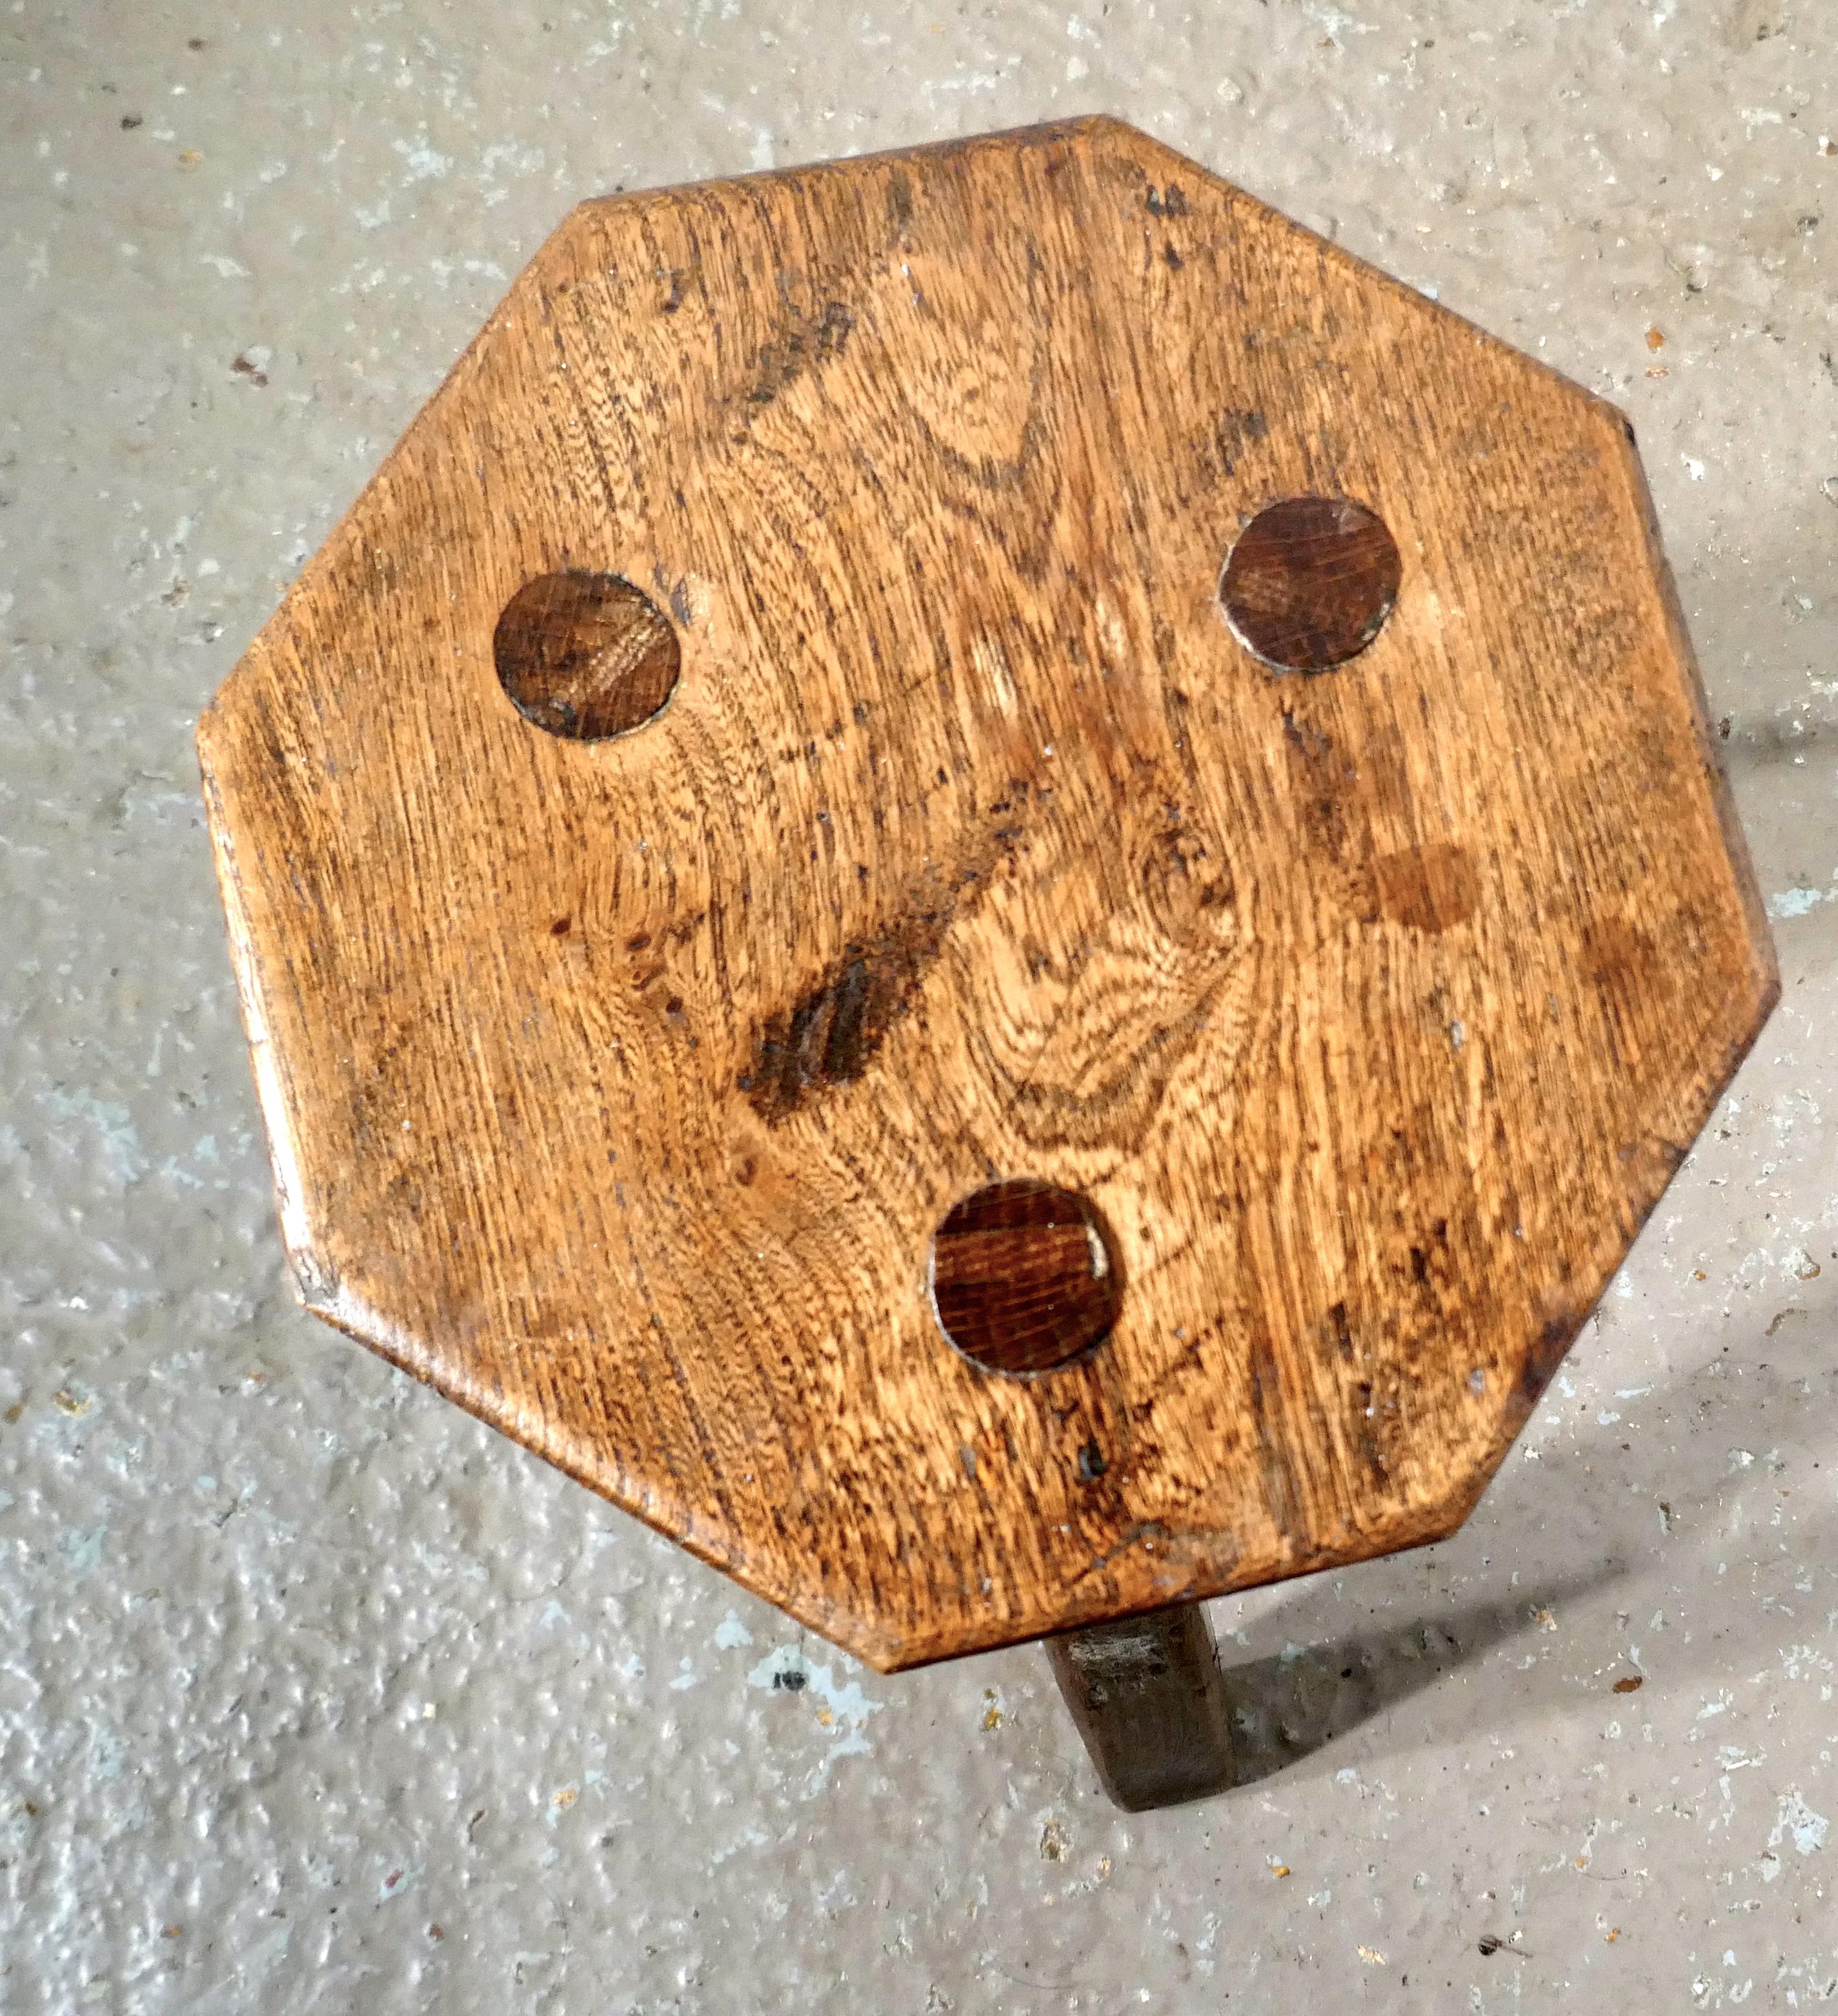 Elm milking stool or dairy stool

The stool is made in elm, the seat has 8 sides and it is 1.5” thick it is a very sturdy piece standing on 3 oak legs
The stool is in very sound condition with an aged patina it is 14.5” tall, the seat is 10”x 8”